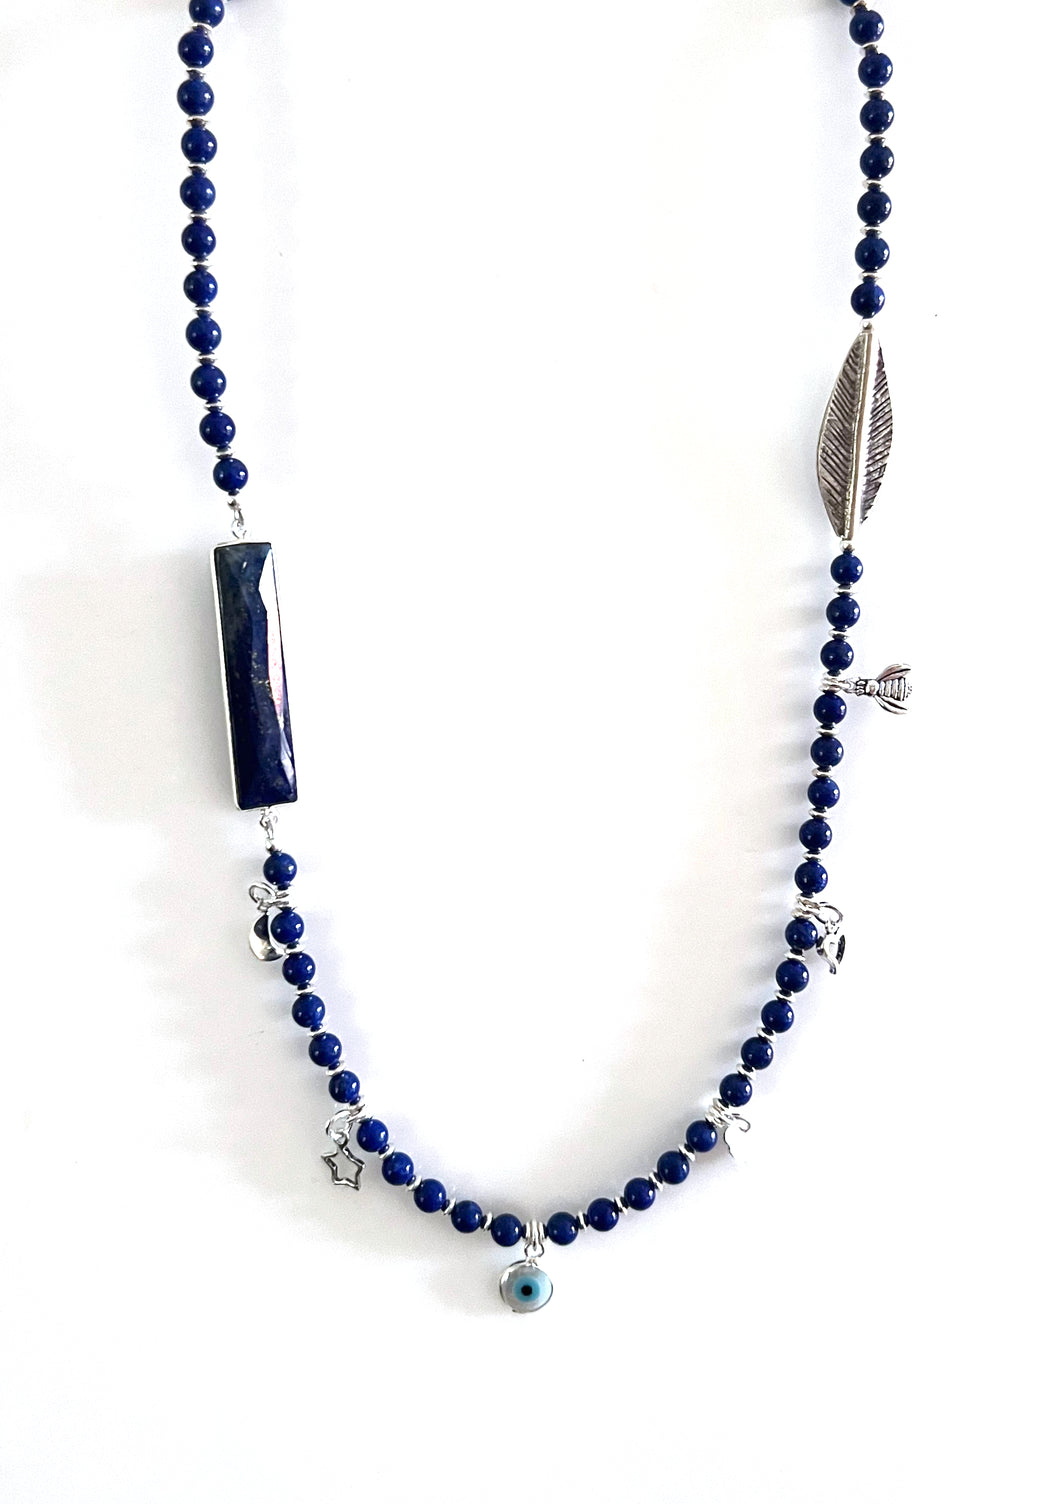 Australian Handmade Blue Necklace with Lapis Lazuli Sterling Silver Charms and Evil Eye